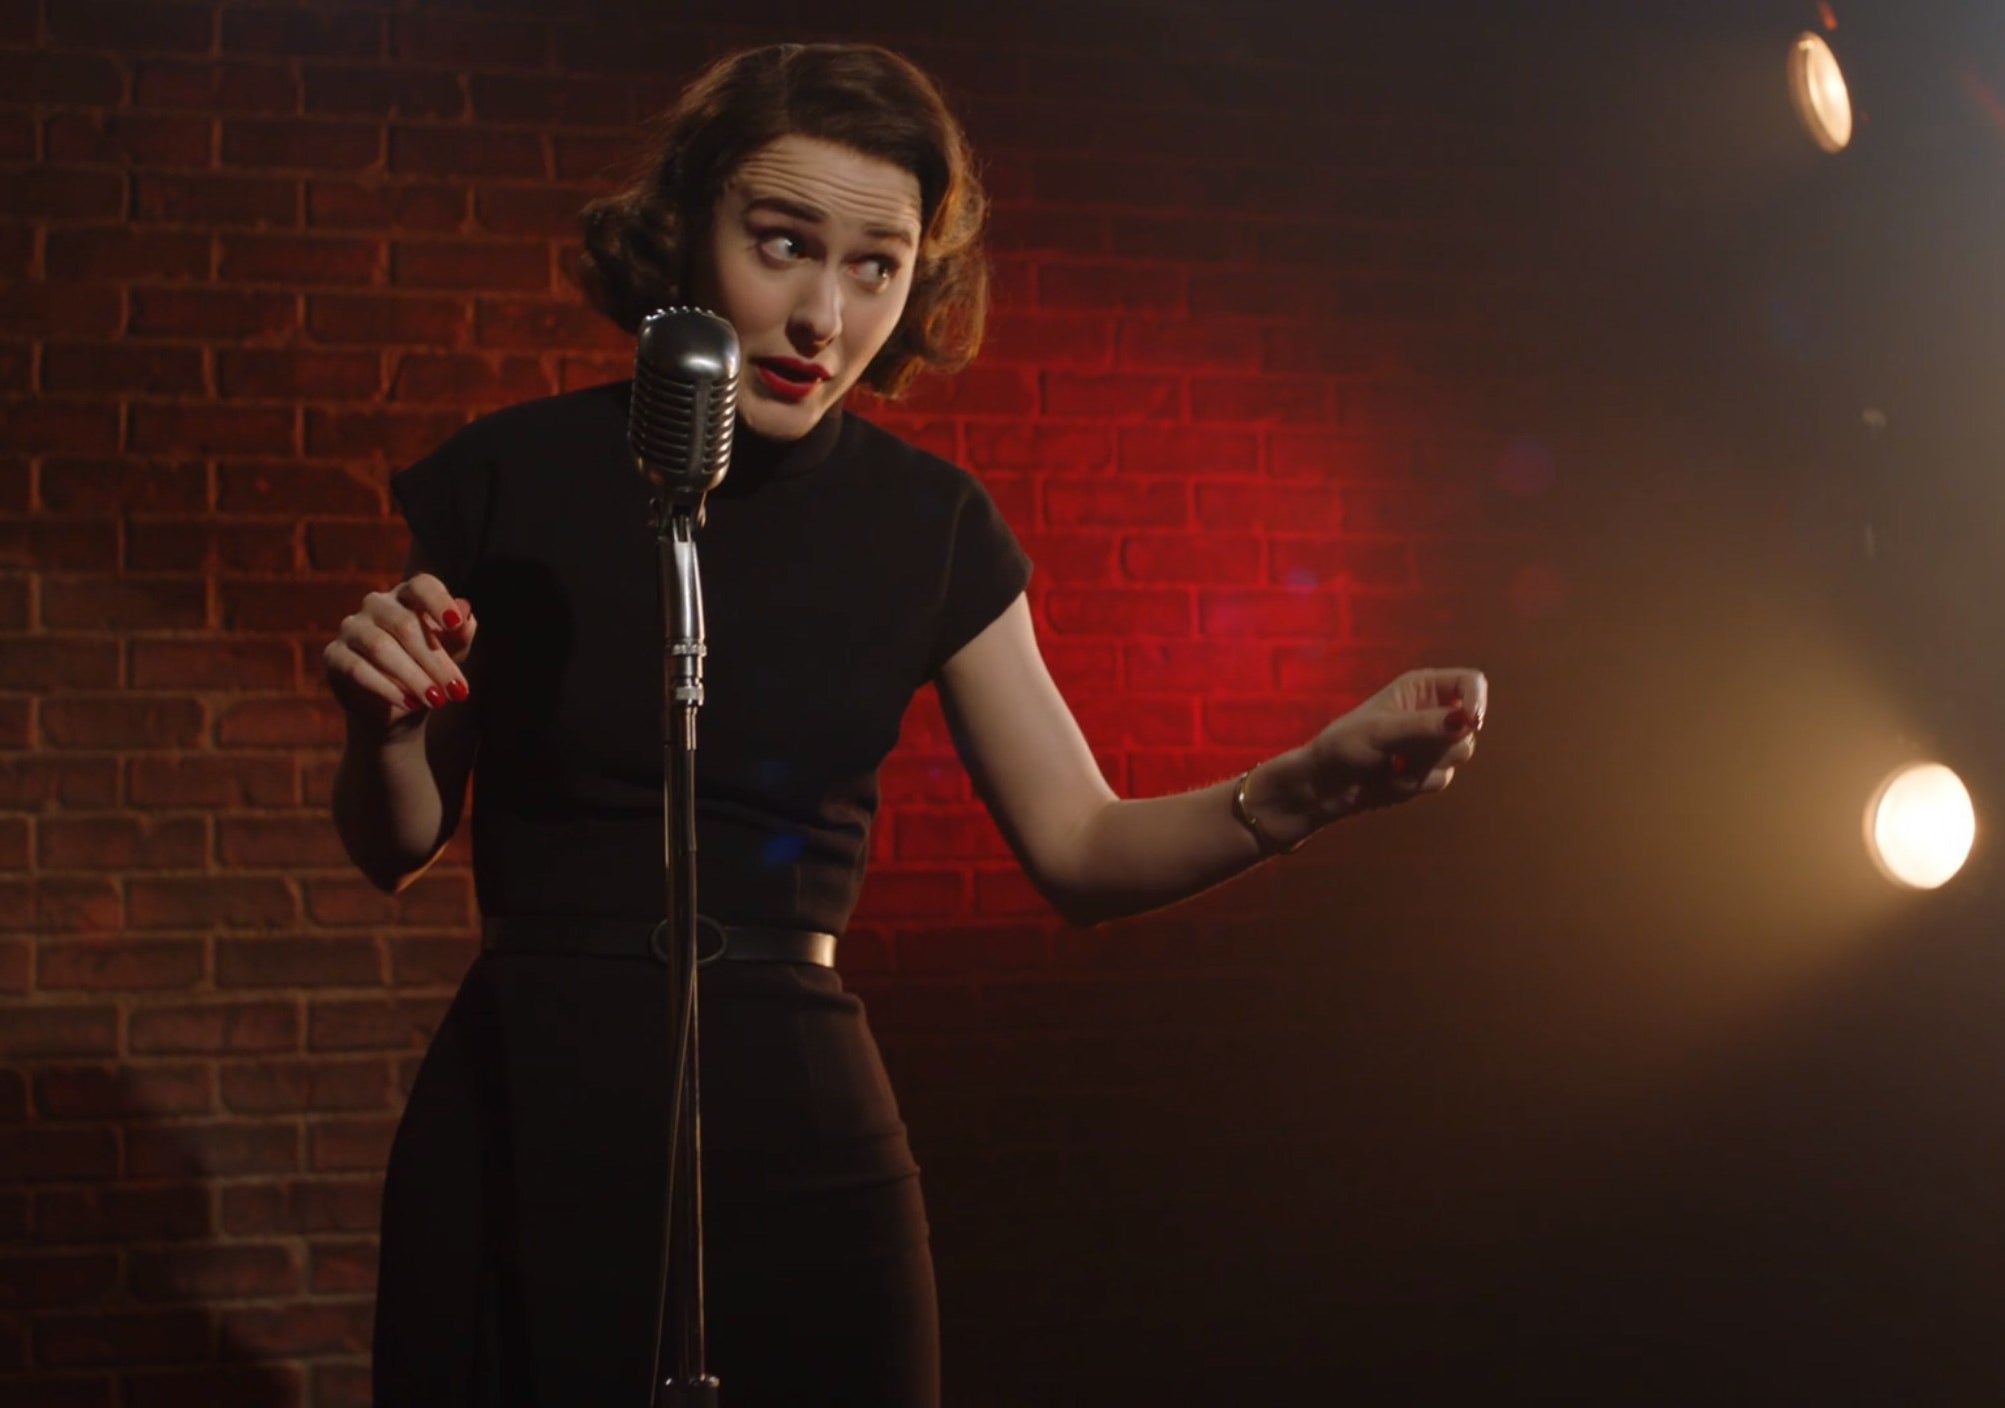 Screenshot from Mrs. Maisel shows Midge preforming on stage